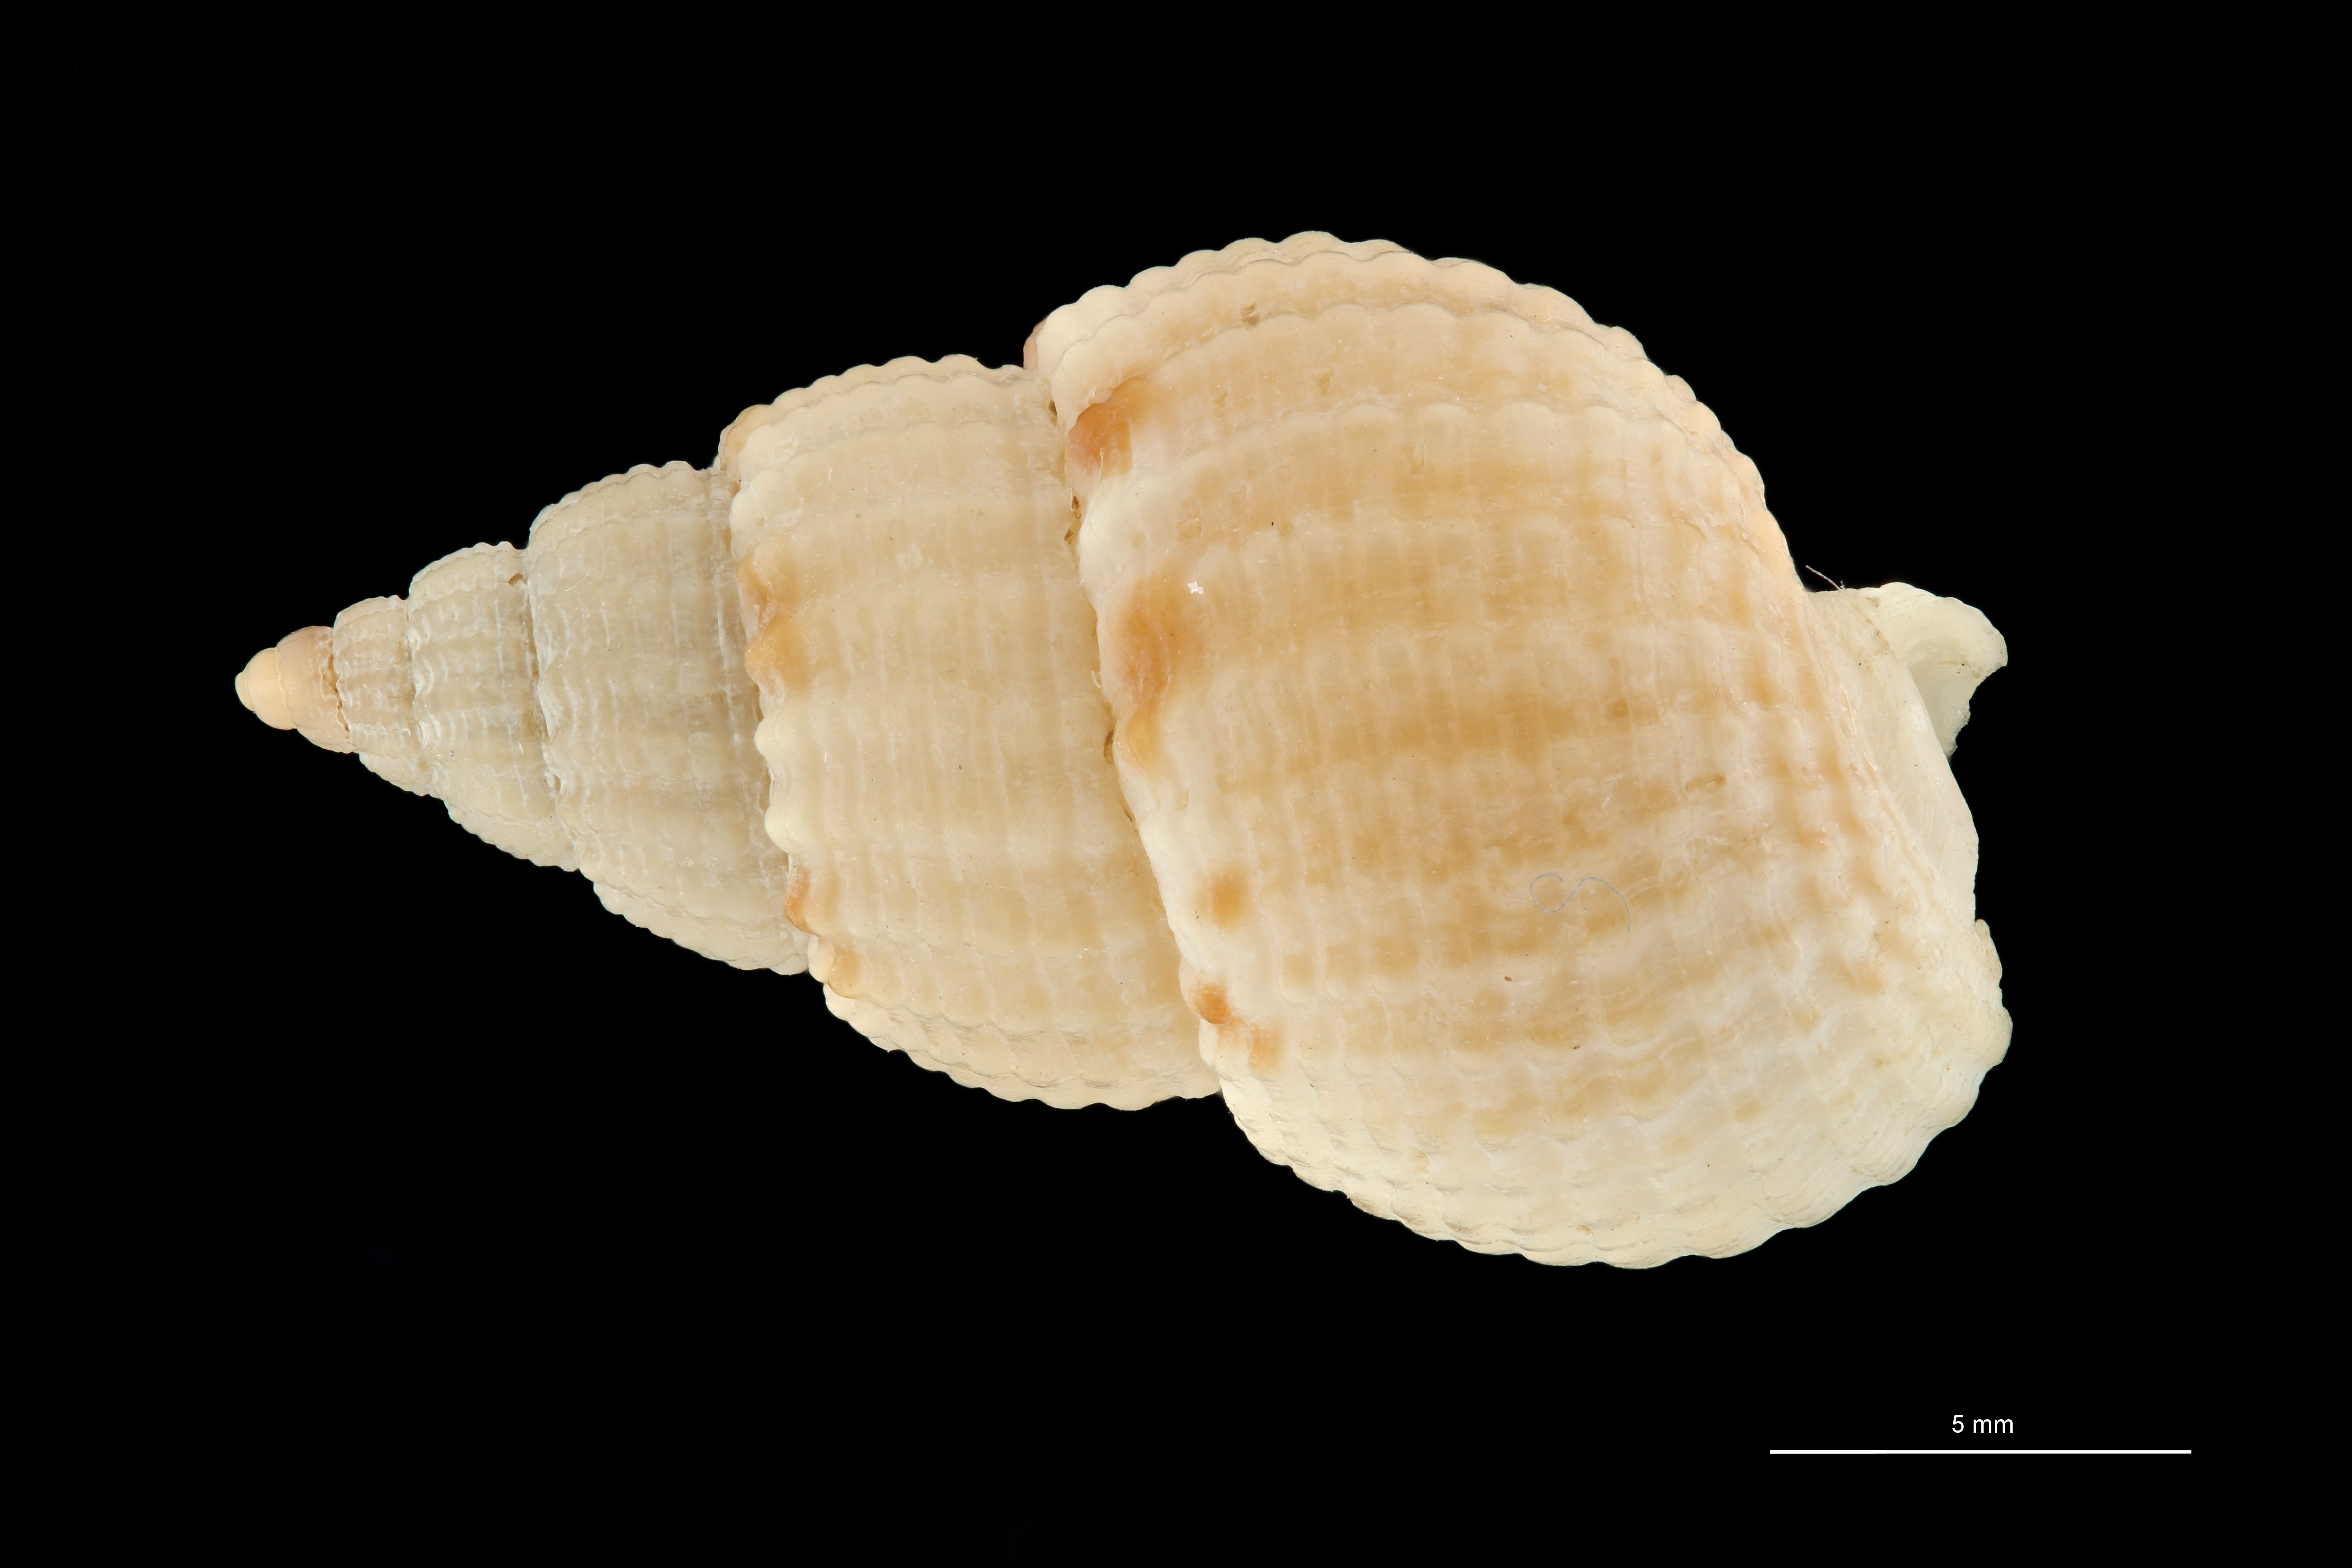 BE-RBINS-INV HOLOTYPE MT 422 Nassarius parcipictus DORSAL ZS PMax Scaled.jpg